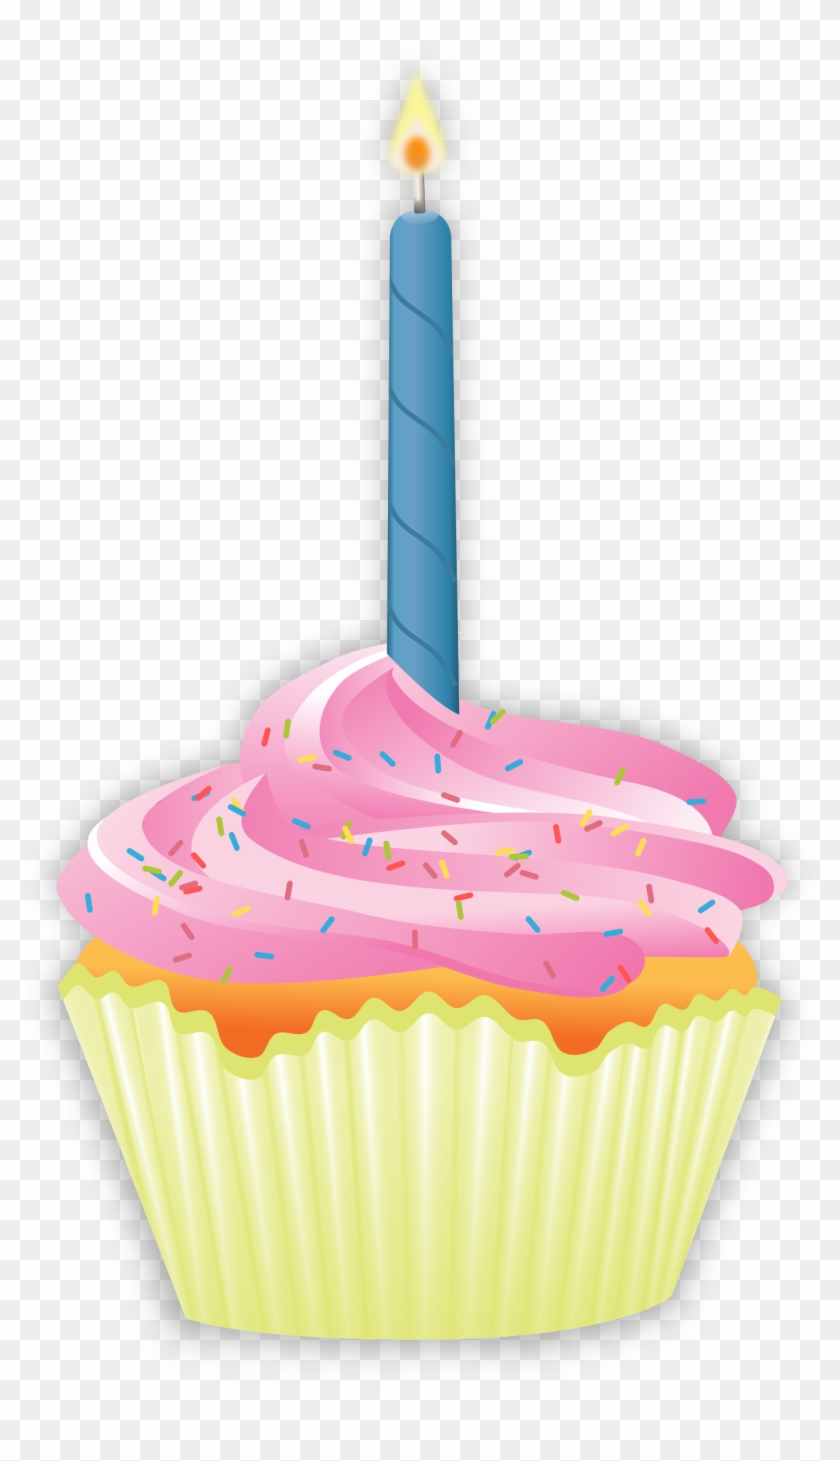 Cupcake - Cupcake With Candle Clipart #1265326